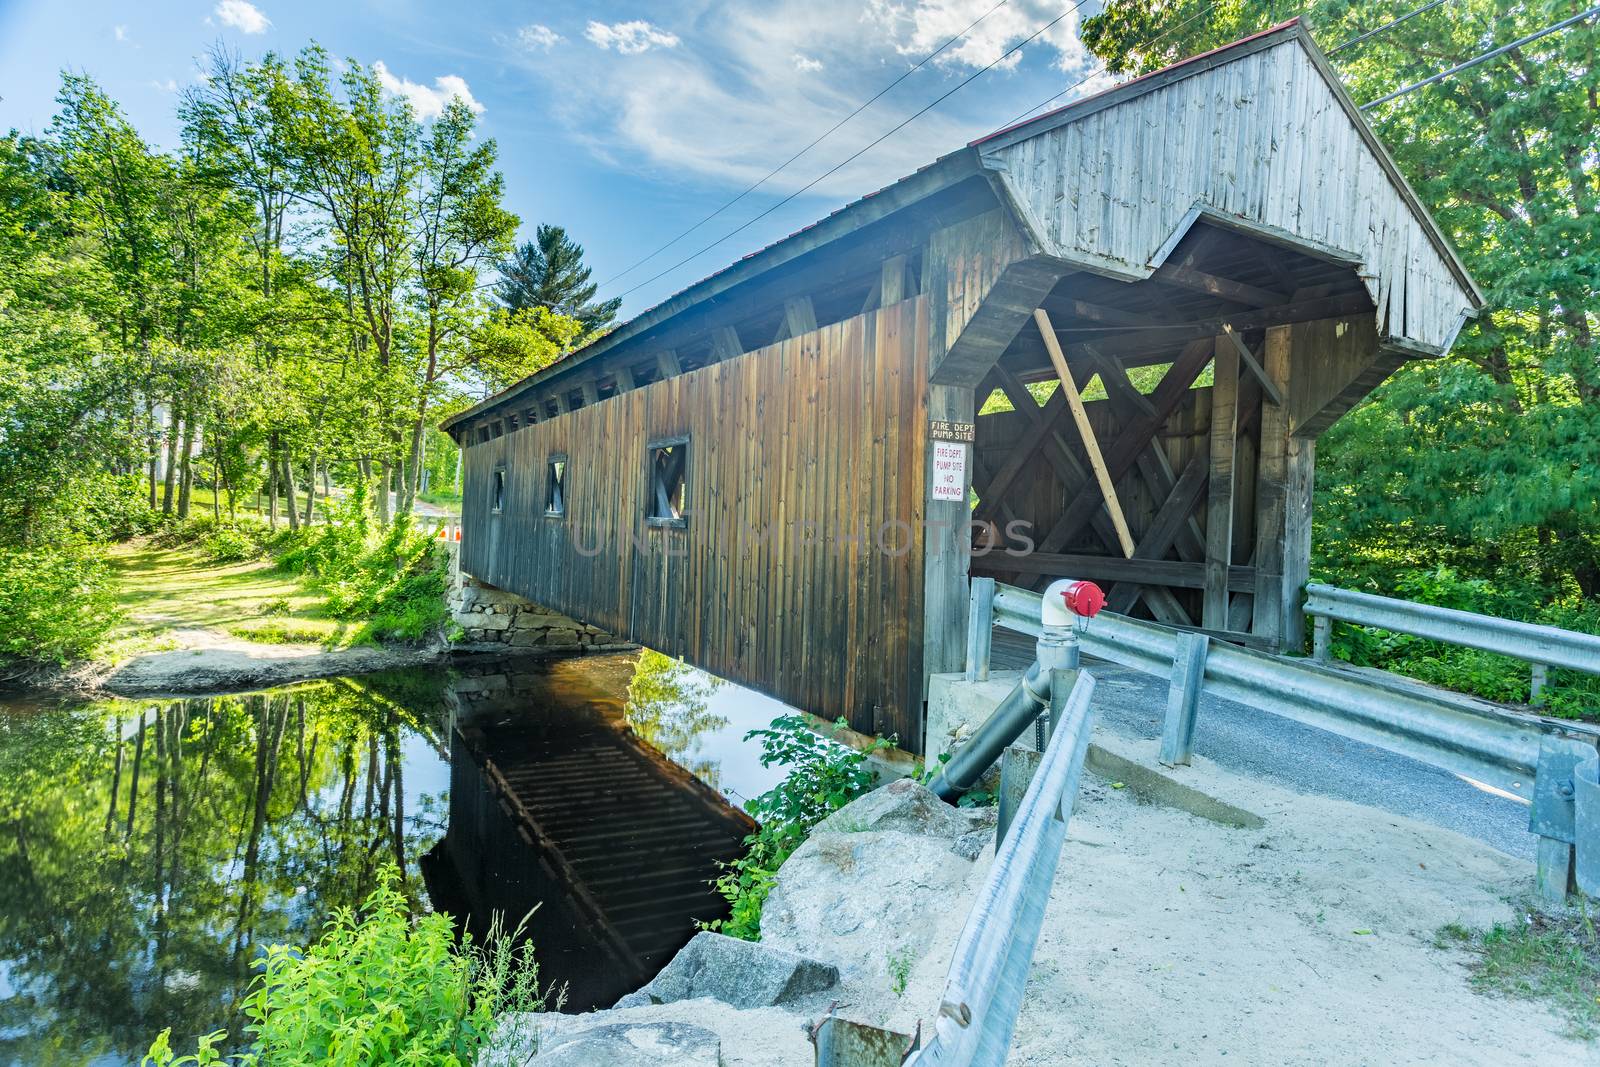 The Waterloo Covered Bridge carries Newmarket Road over the Warner River near the Waterloo Falls in Warner, New Hampshire. The Town lattice truss bridge was built in 1859-60.